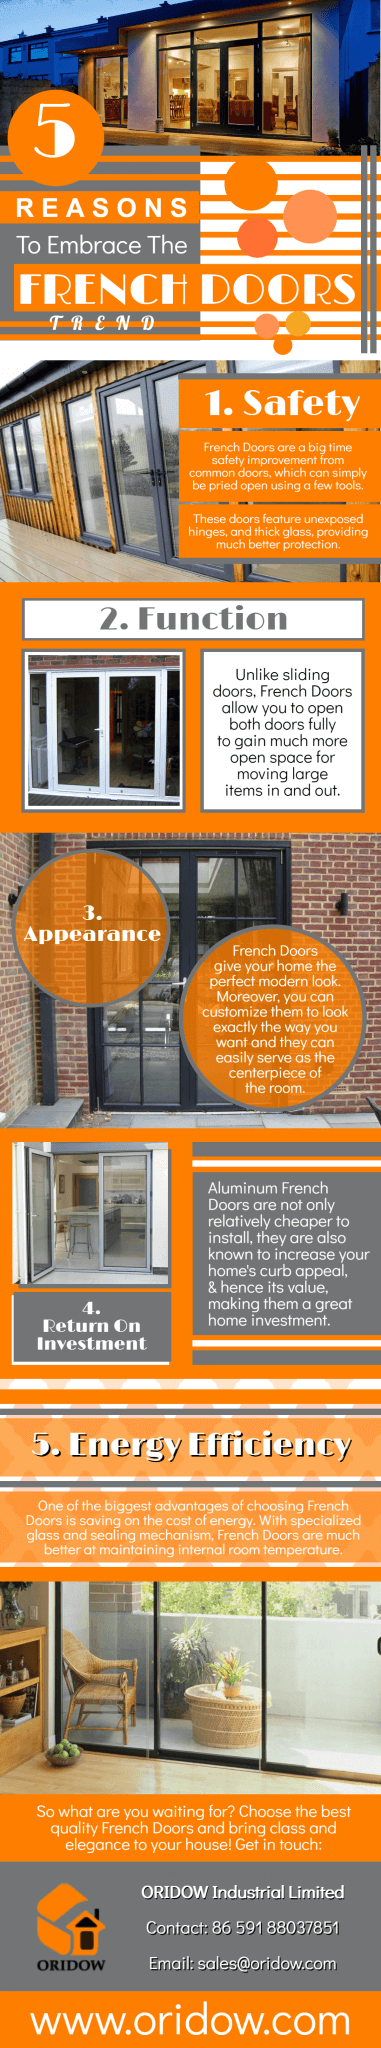 5 Reasons To Embrace The French Doors Trend